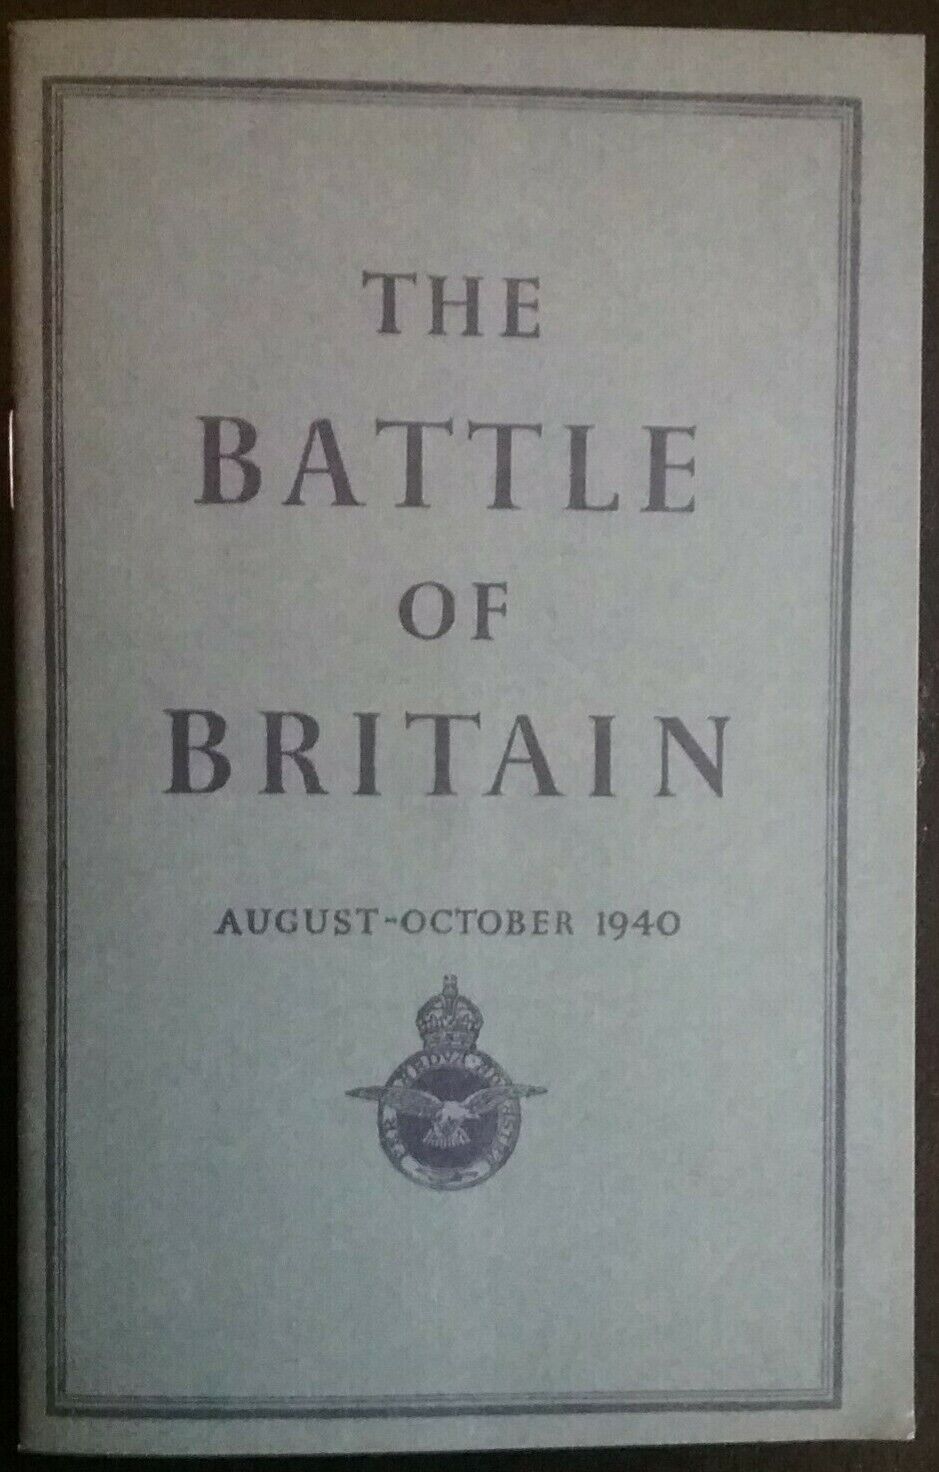 THE BATTLE OF BRITAIN (AUGUST-OCTOBER 1940)SMALL BOOK FULL ACCOUNT OF AIR BATTLE